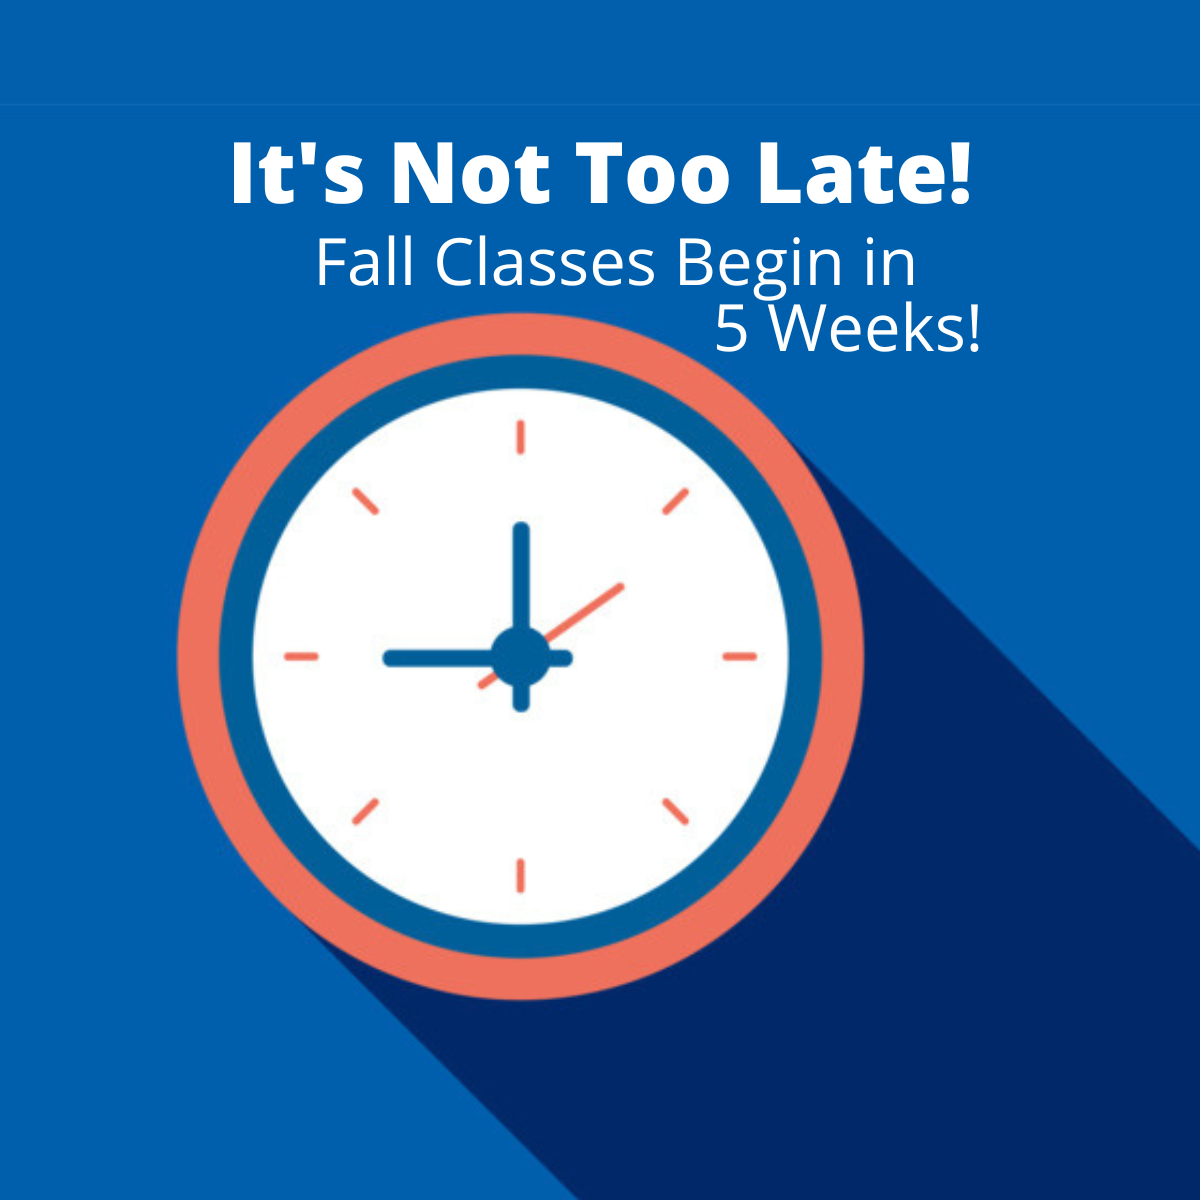 It's not too late to enroll for fall classes